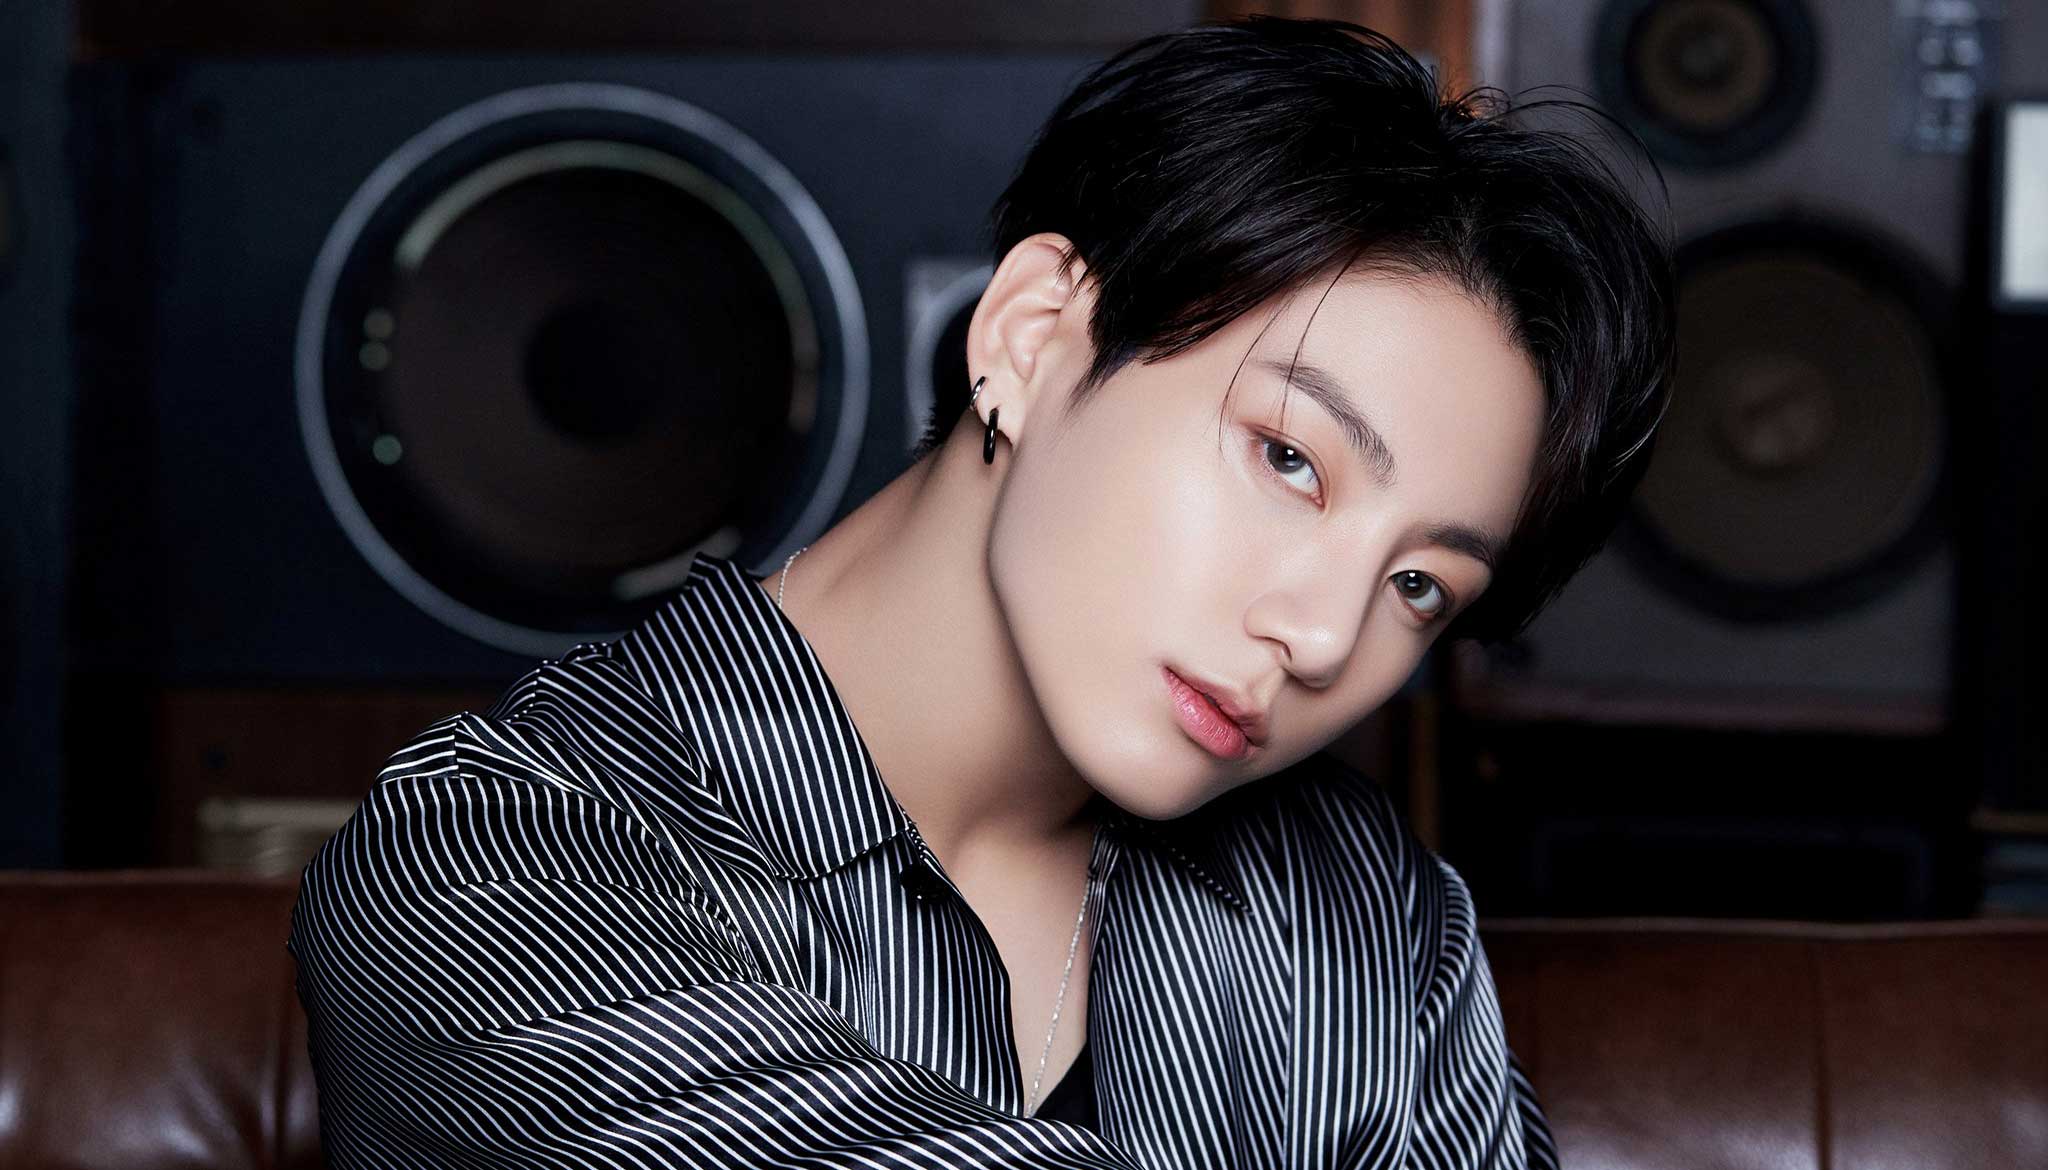 BTS' Jungkook becomes first to surpass 25bn views for hashtag on TikTok